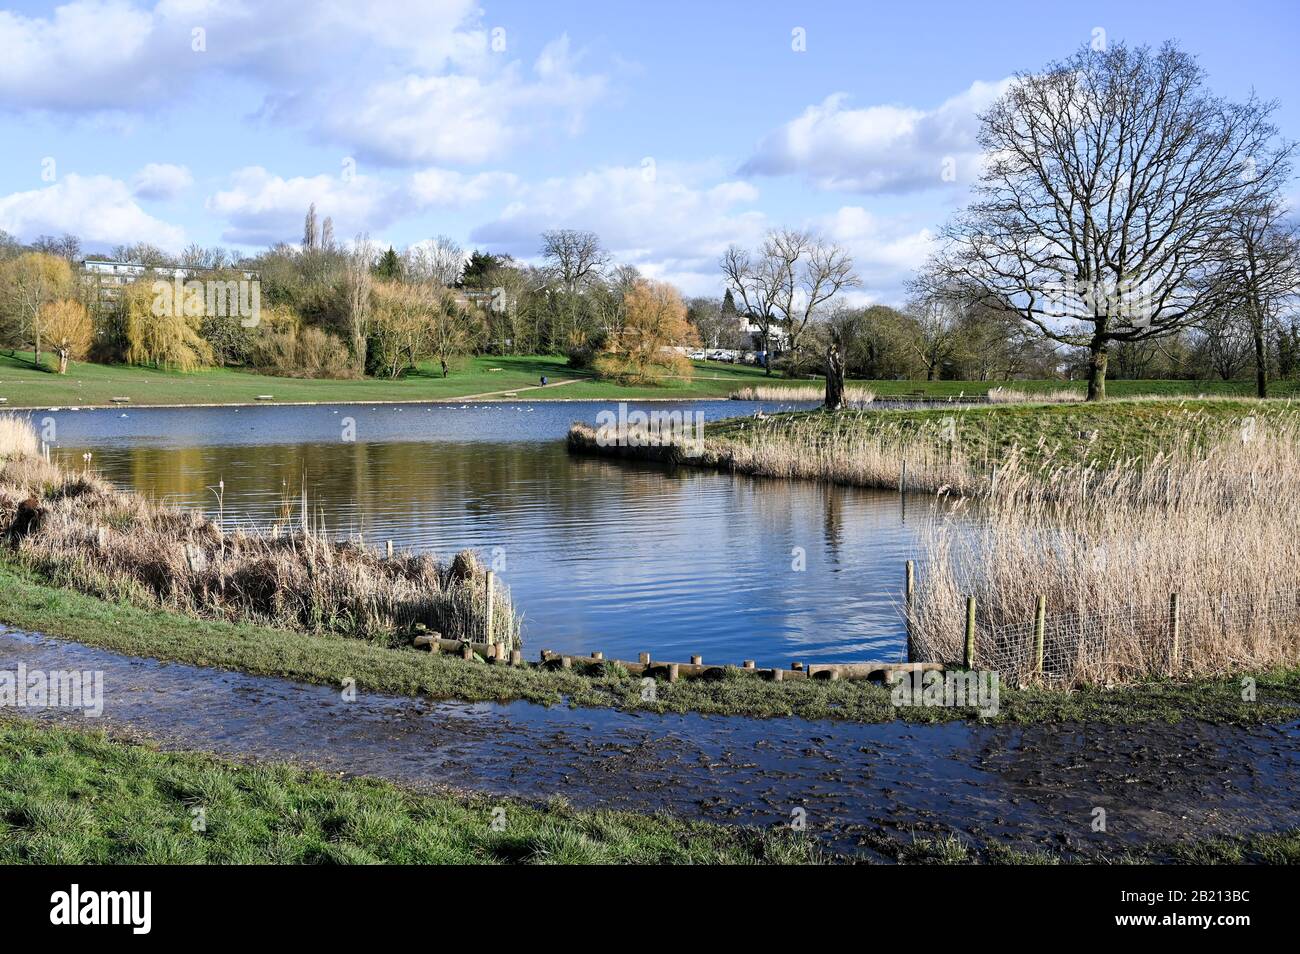 A sunny day in early spring by the Model Boating Pond, Hampstead Heath, London, UK. Stock Photo